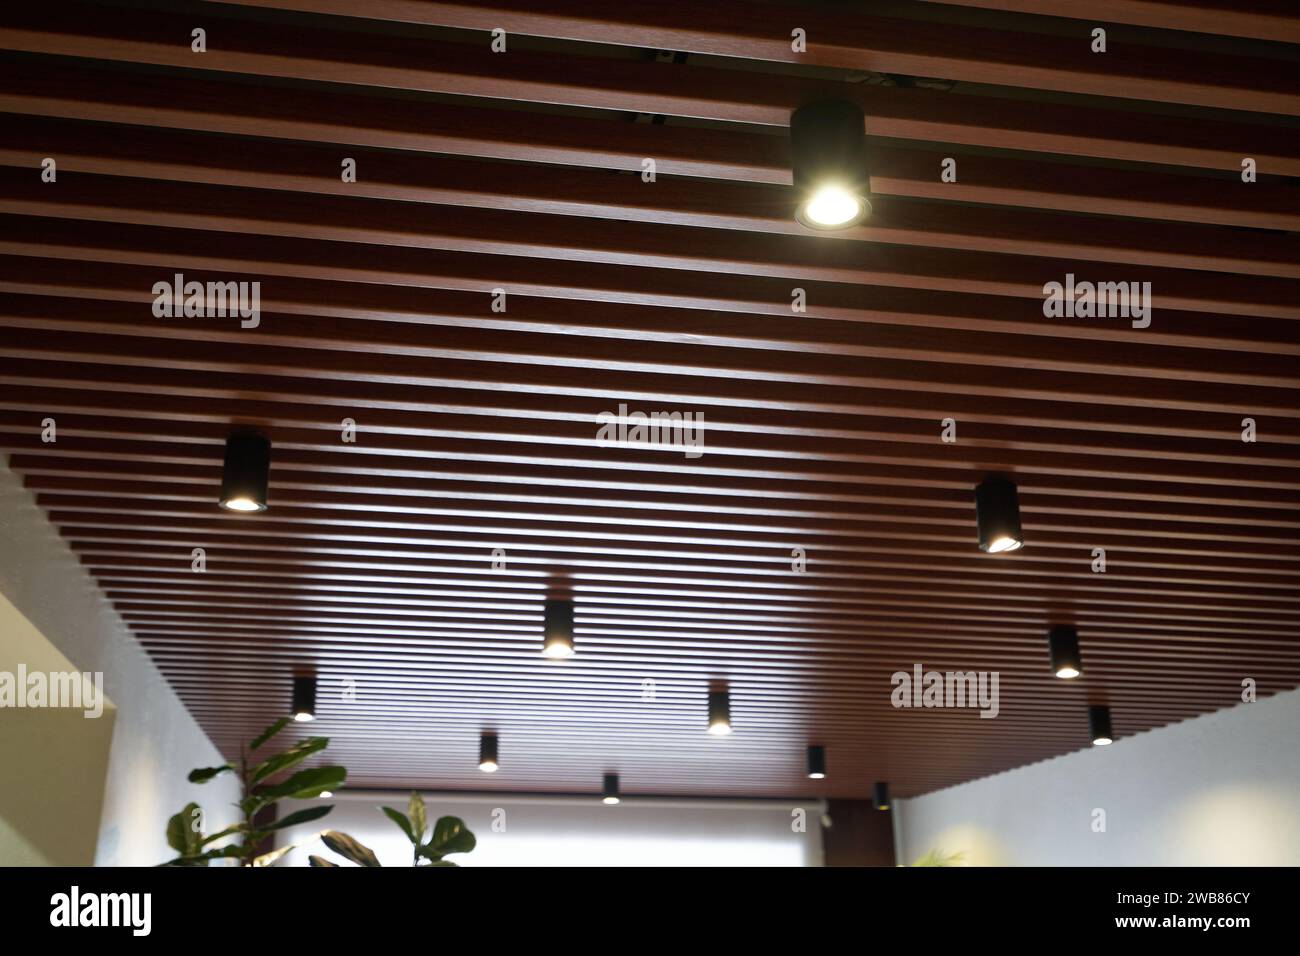 The ceiling is made of wooden slats with spotlights Stock Photo